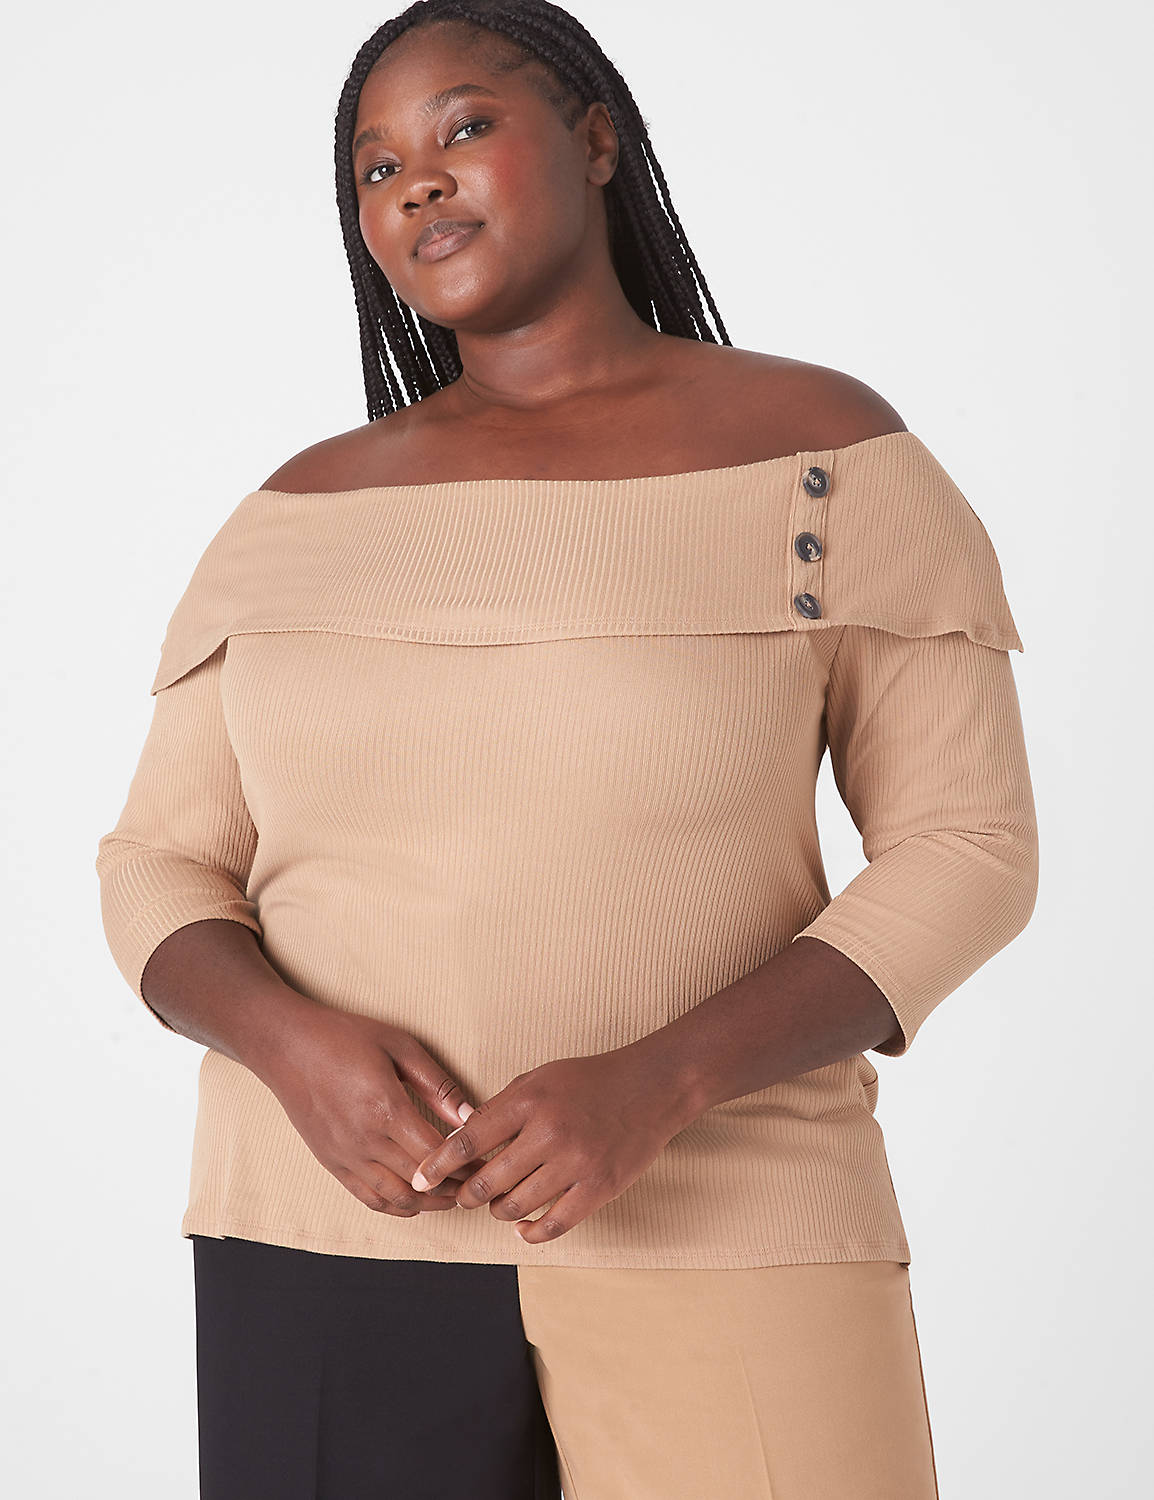 Classic 3/4 Sleeve Off the Shoulder Product Image 1